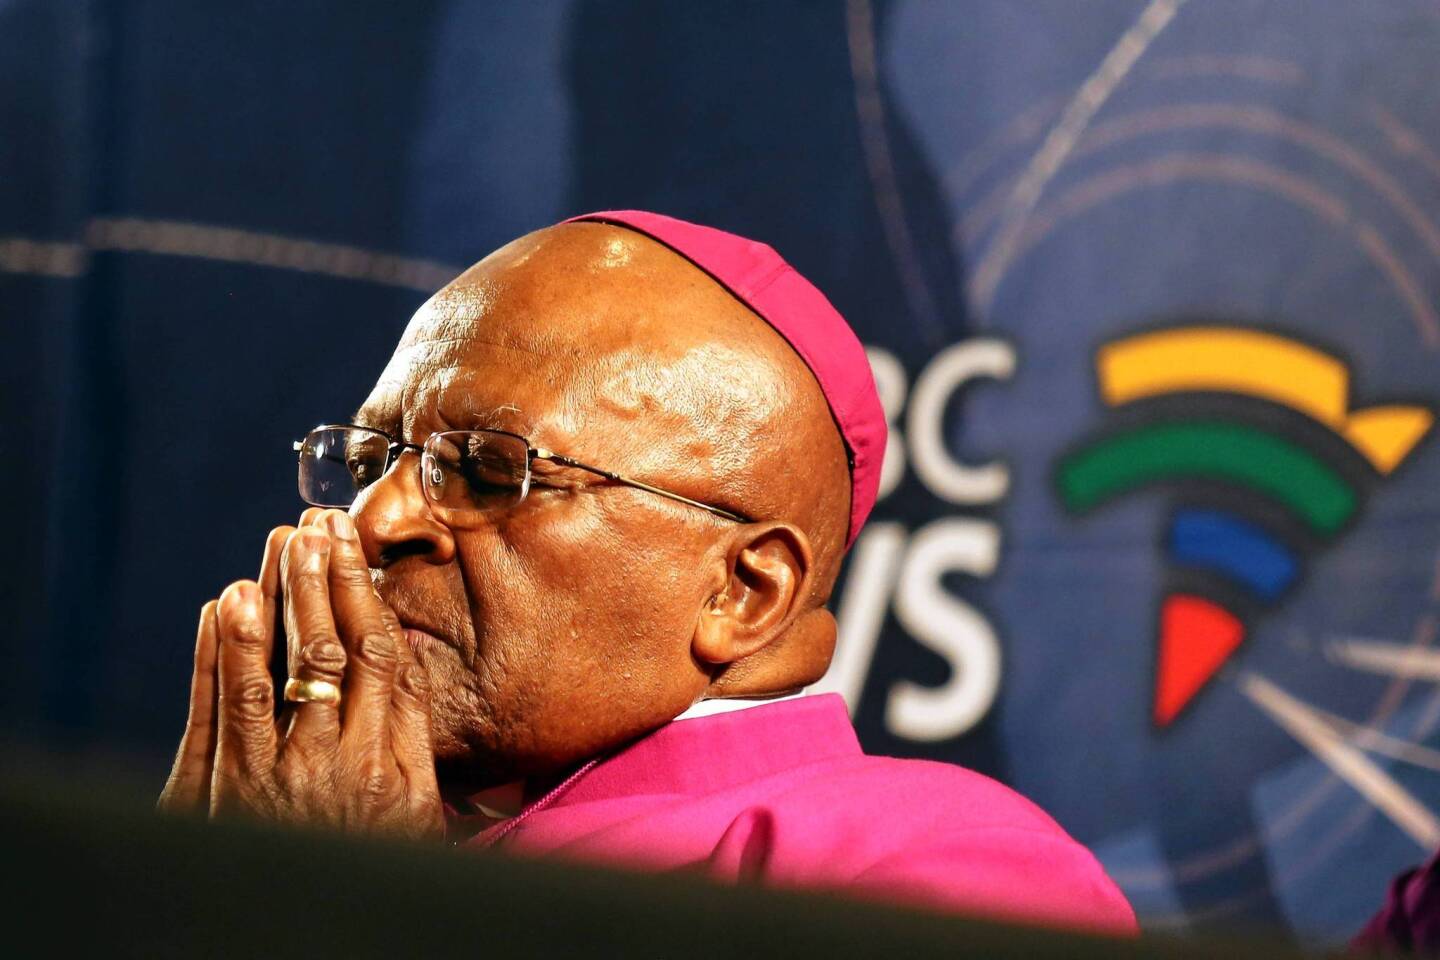 South Africa's Archbishop Desmond Tutu pauses for a moment during a media briefing in Cape Town, a day after the death of his friend and former South African President Nelson Mandela.